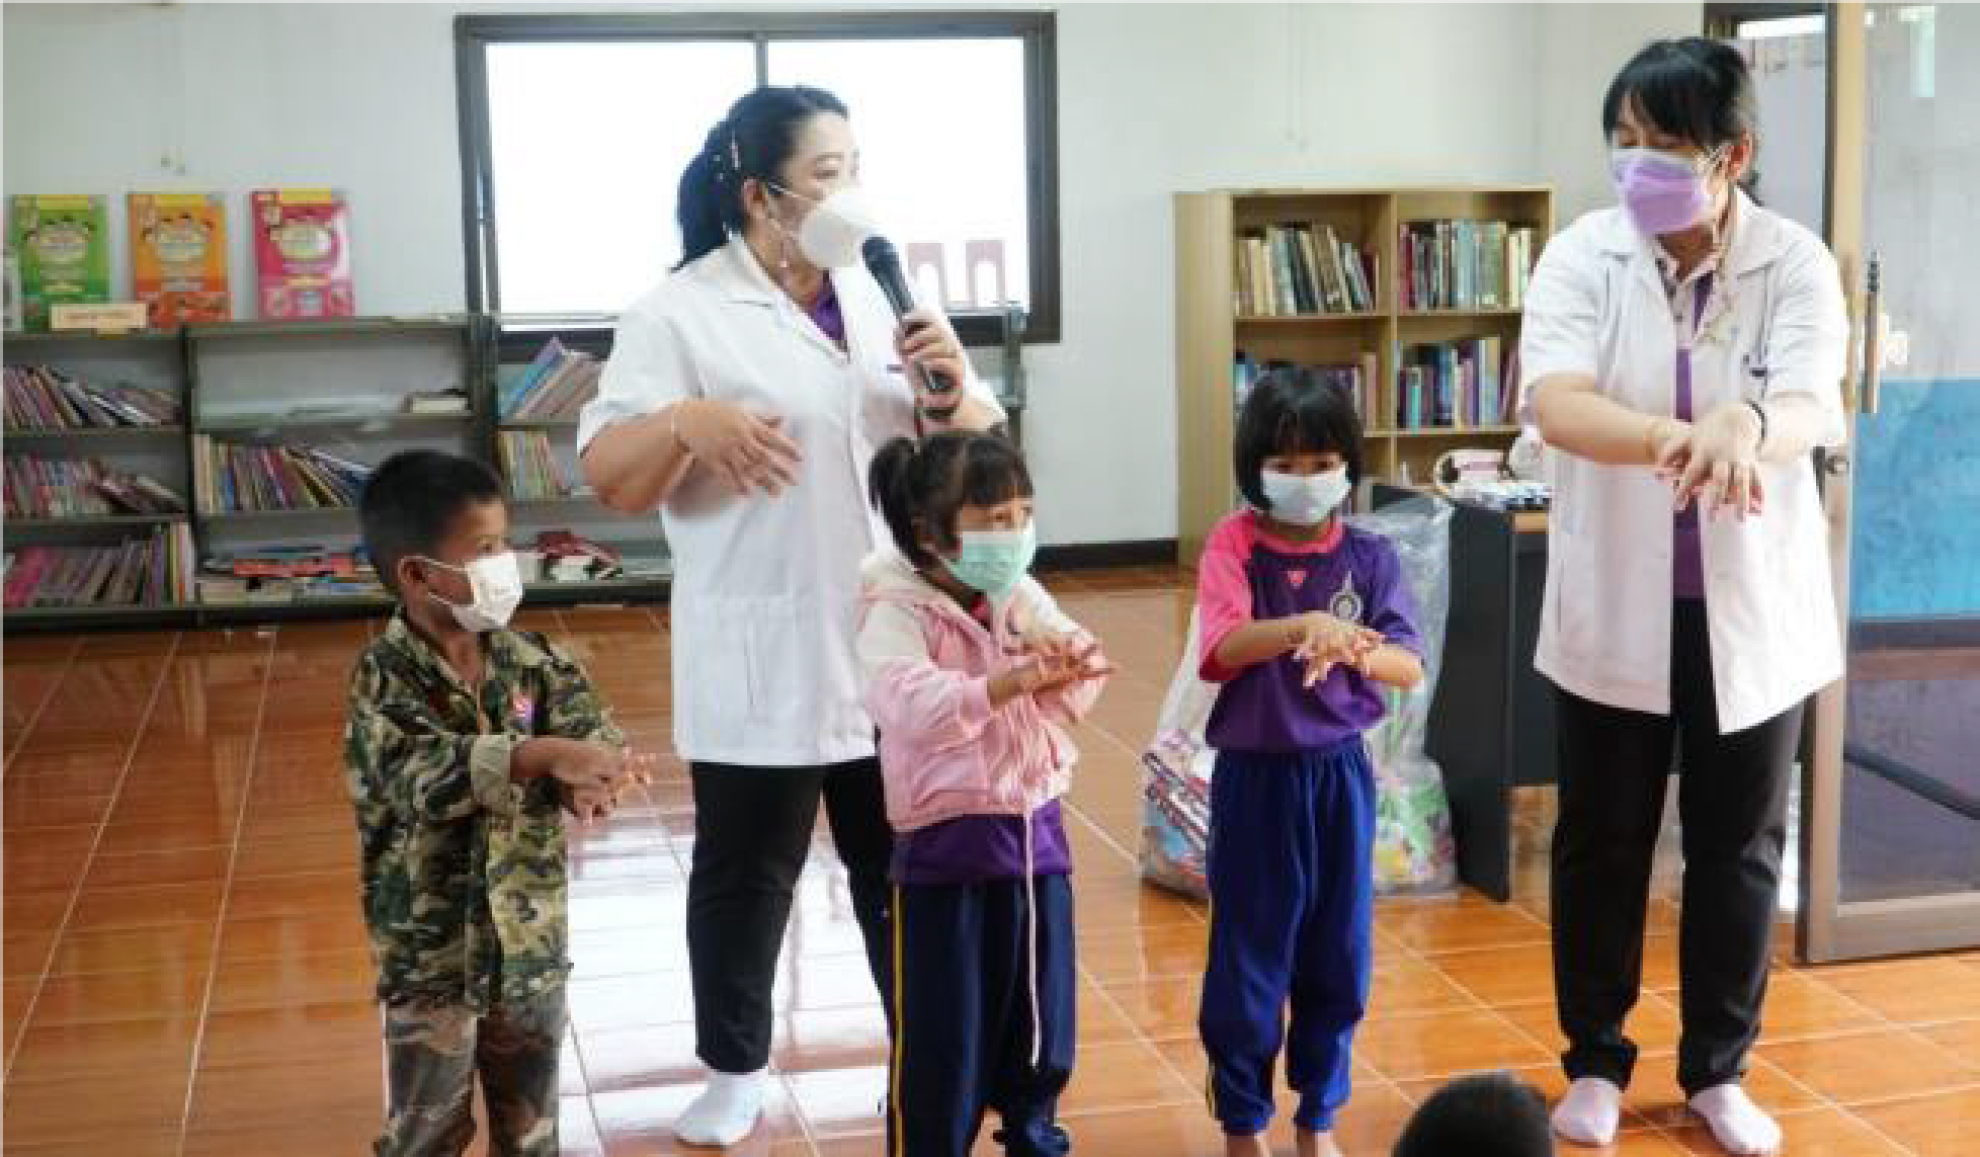 PCMC volunteers provided knowledge on hand hygiene and tooth brushing techniques for the secondary and elementary school students.